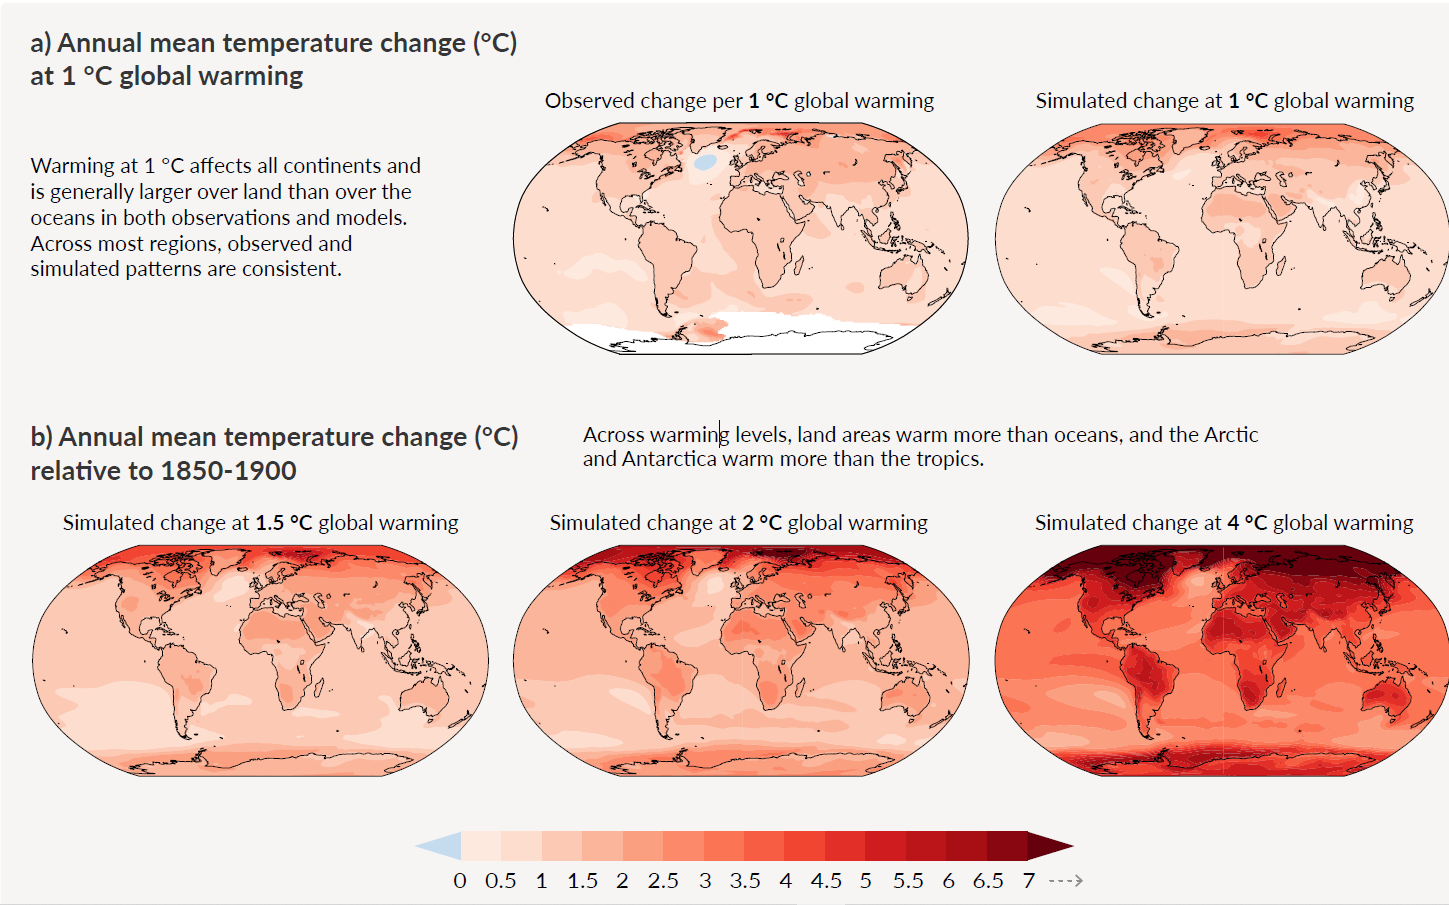 annual mean temperature change in degree C at different levels of warming